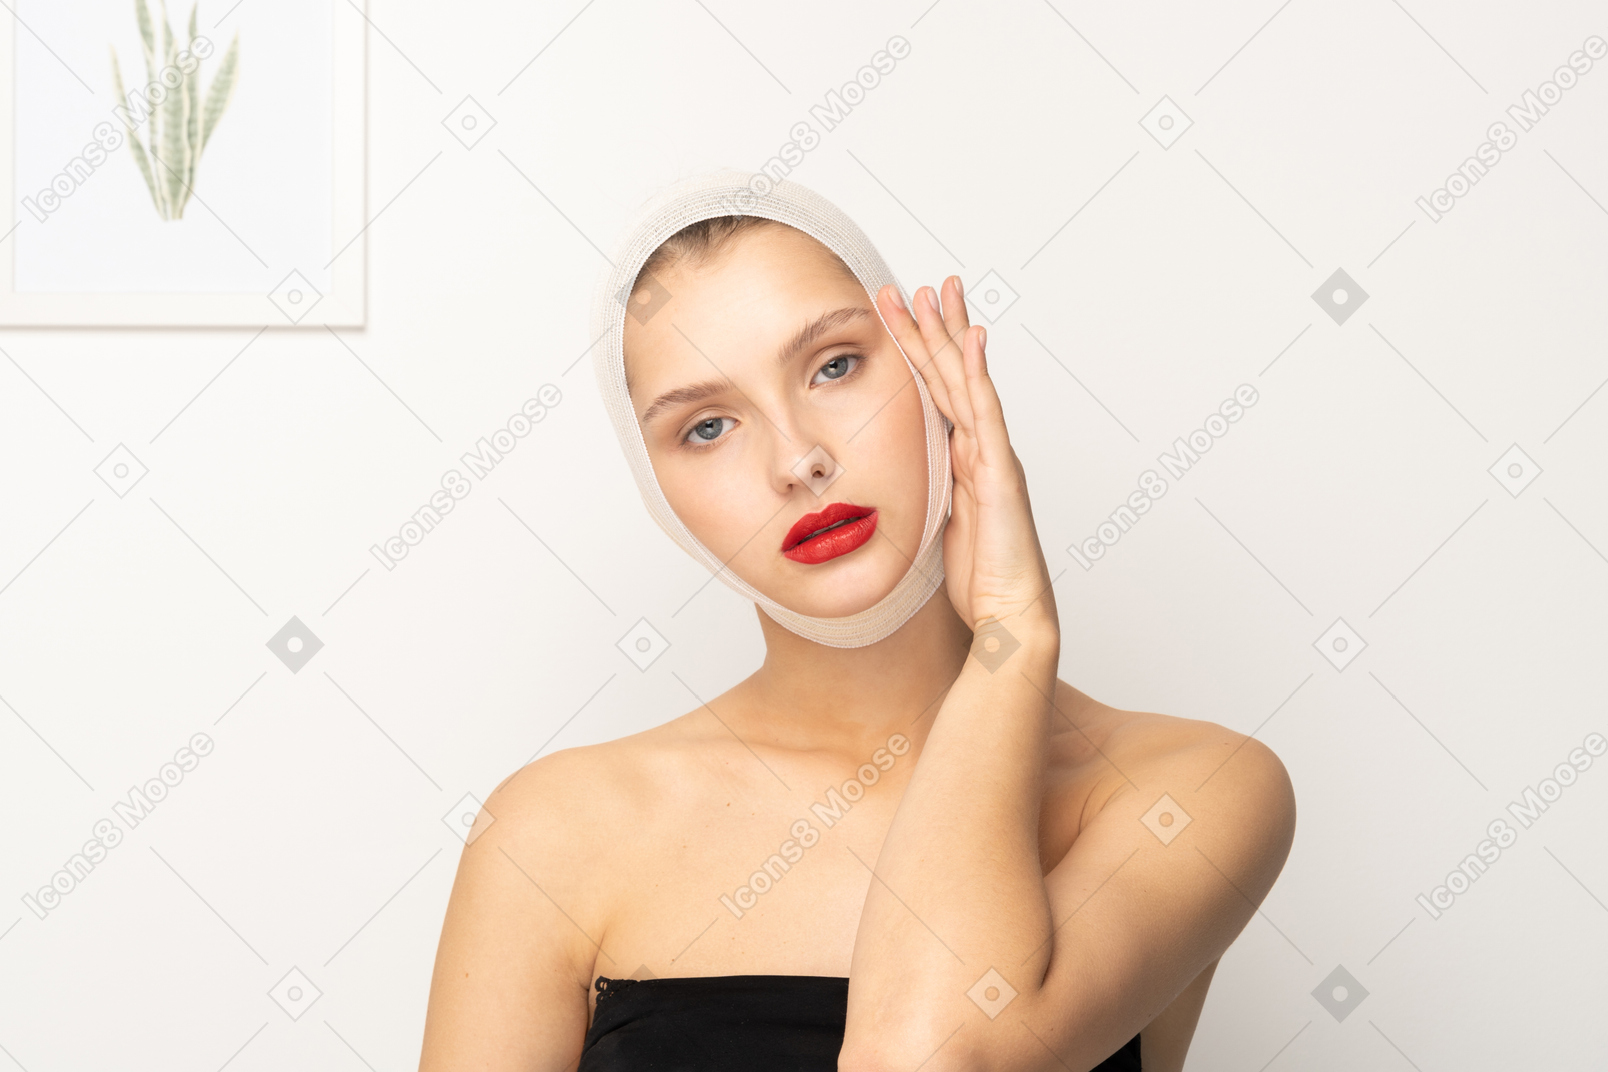 Woman with bandaged head touching side of face